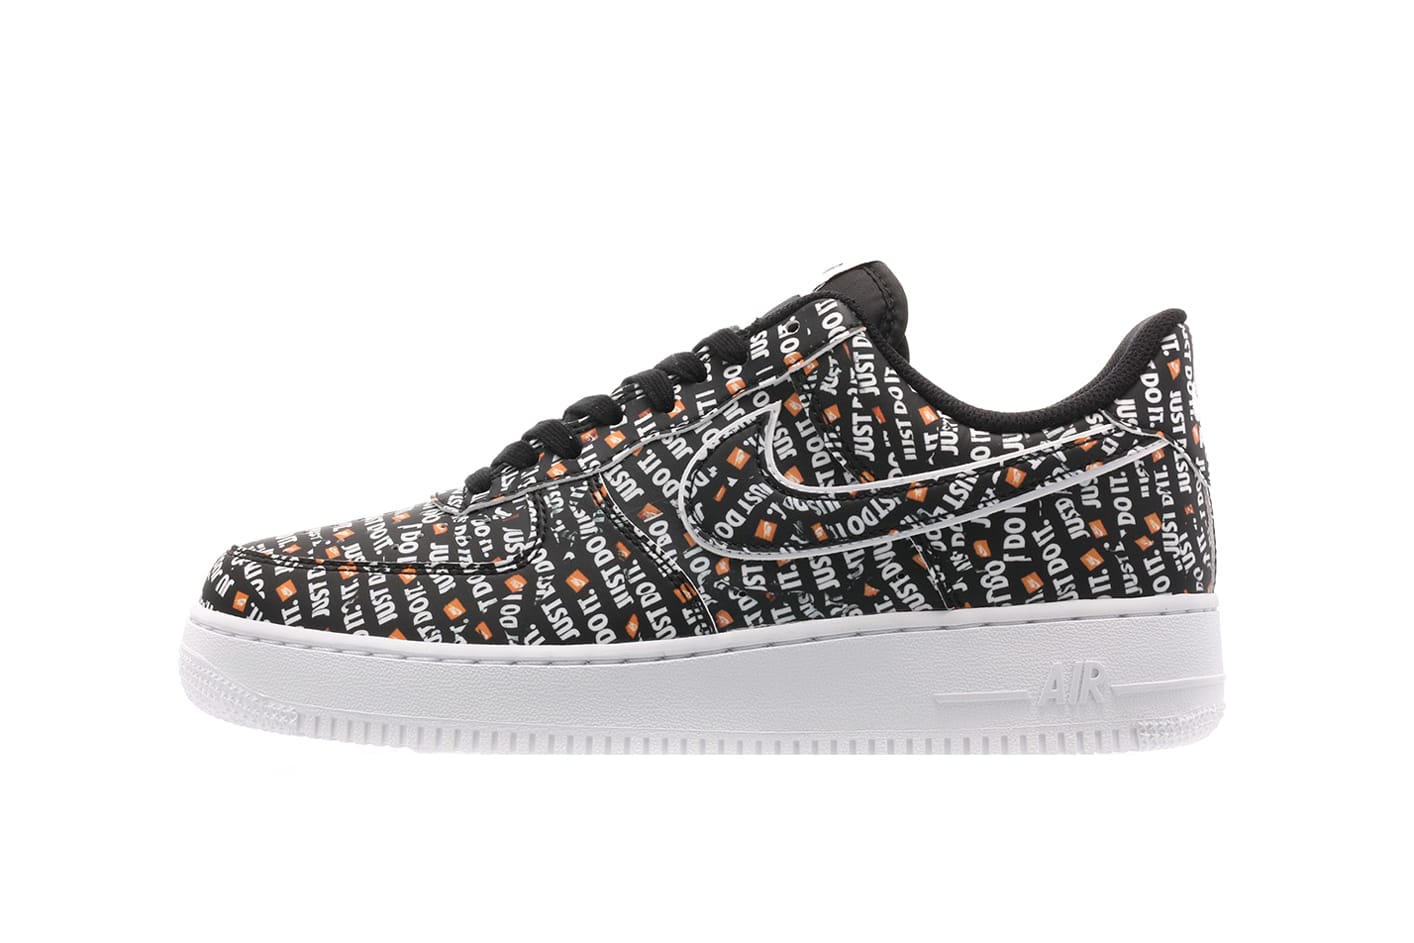 nike air force 1 low just do it pack black